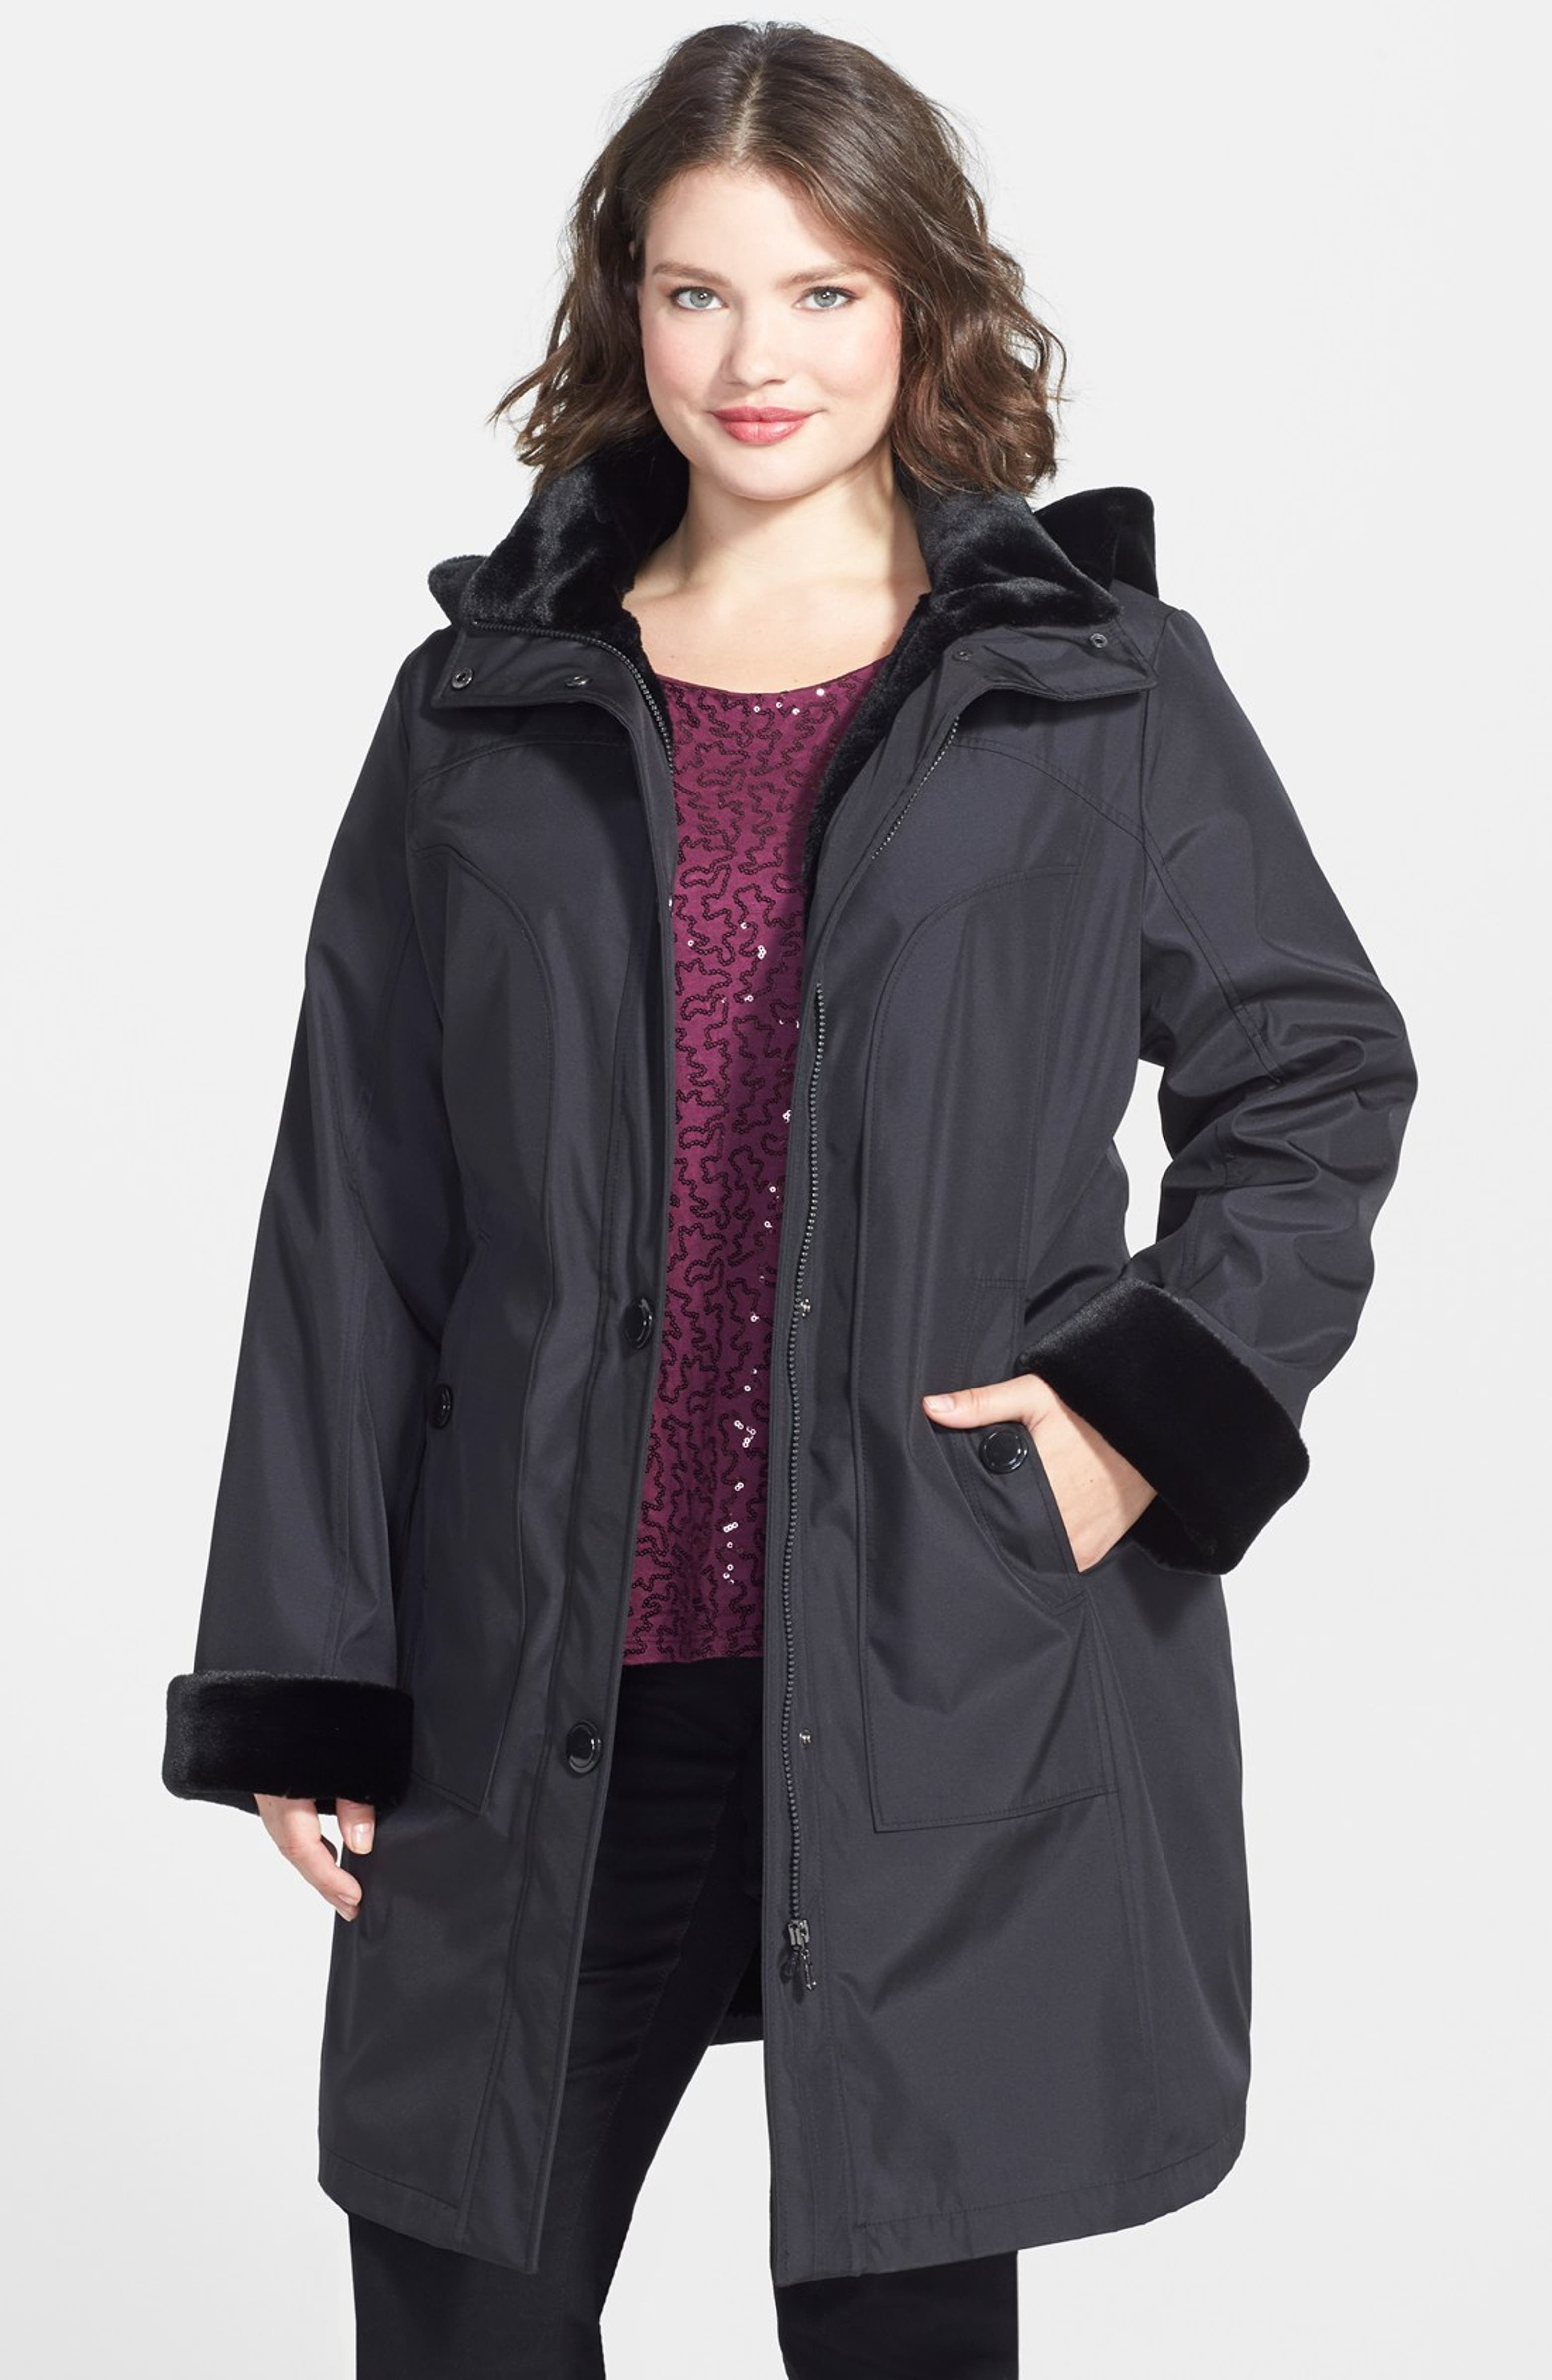 Gallery Long Hooded Storm Coat with Faux Fur Lining & Trim (Plus Size ...